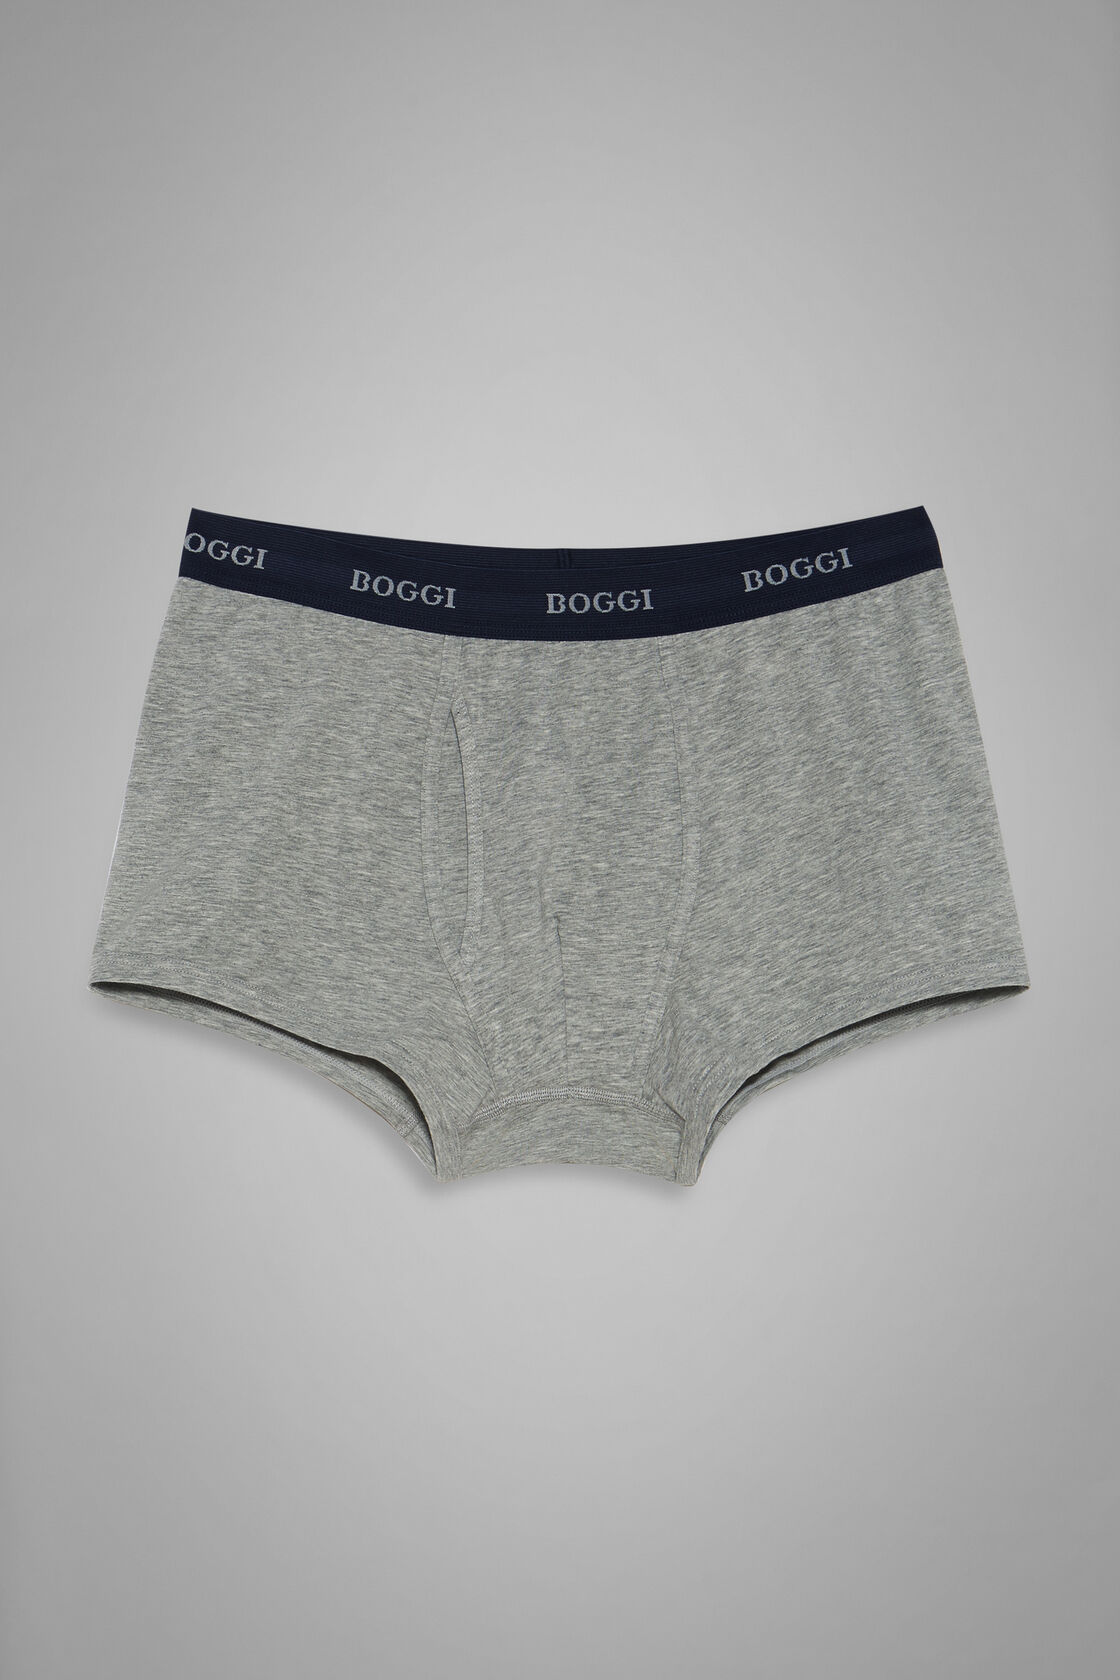 Stretch cotton jersey boxer shorts, Grey, hi-res